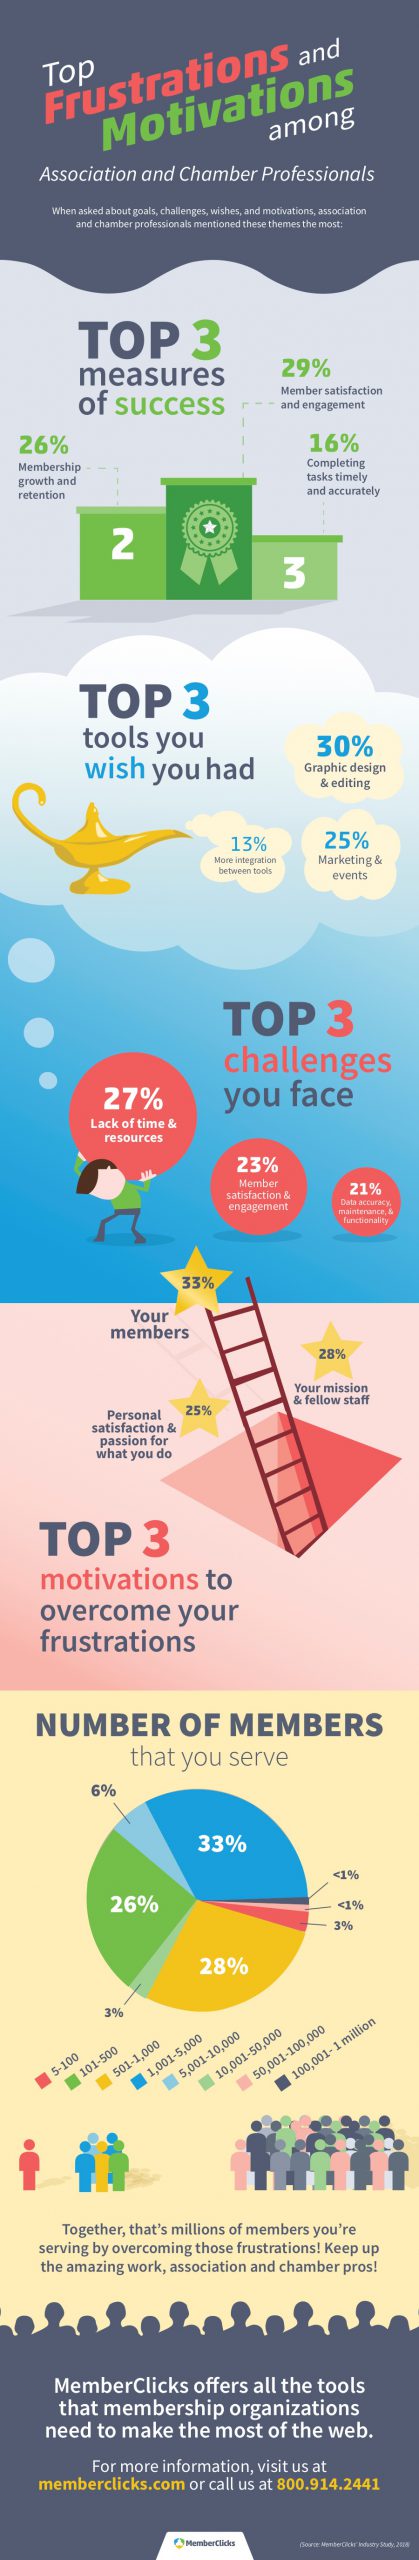 MemberClicks Industry Study Results Infographic